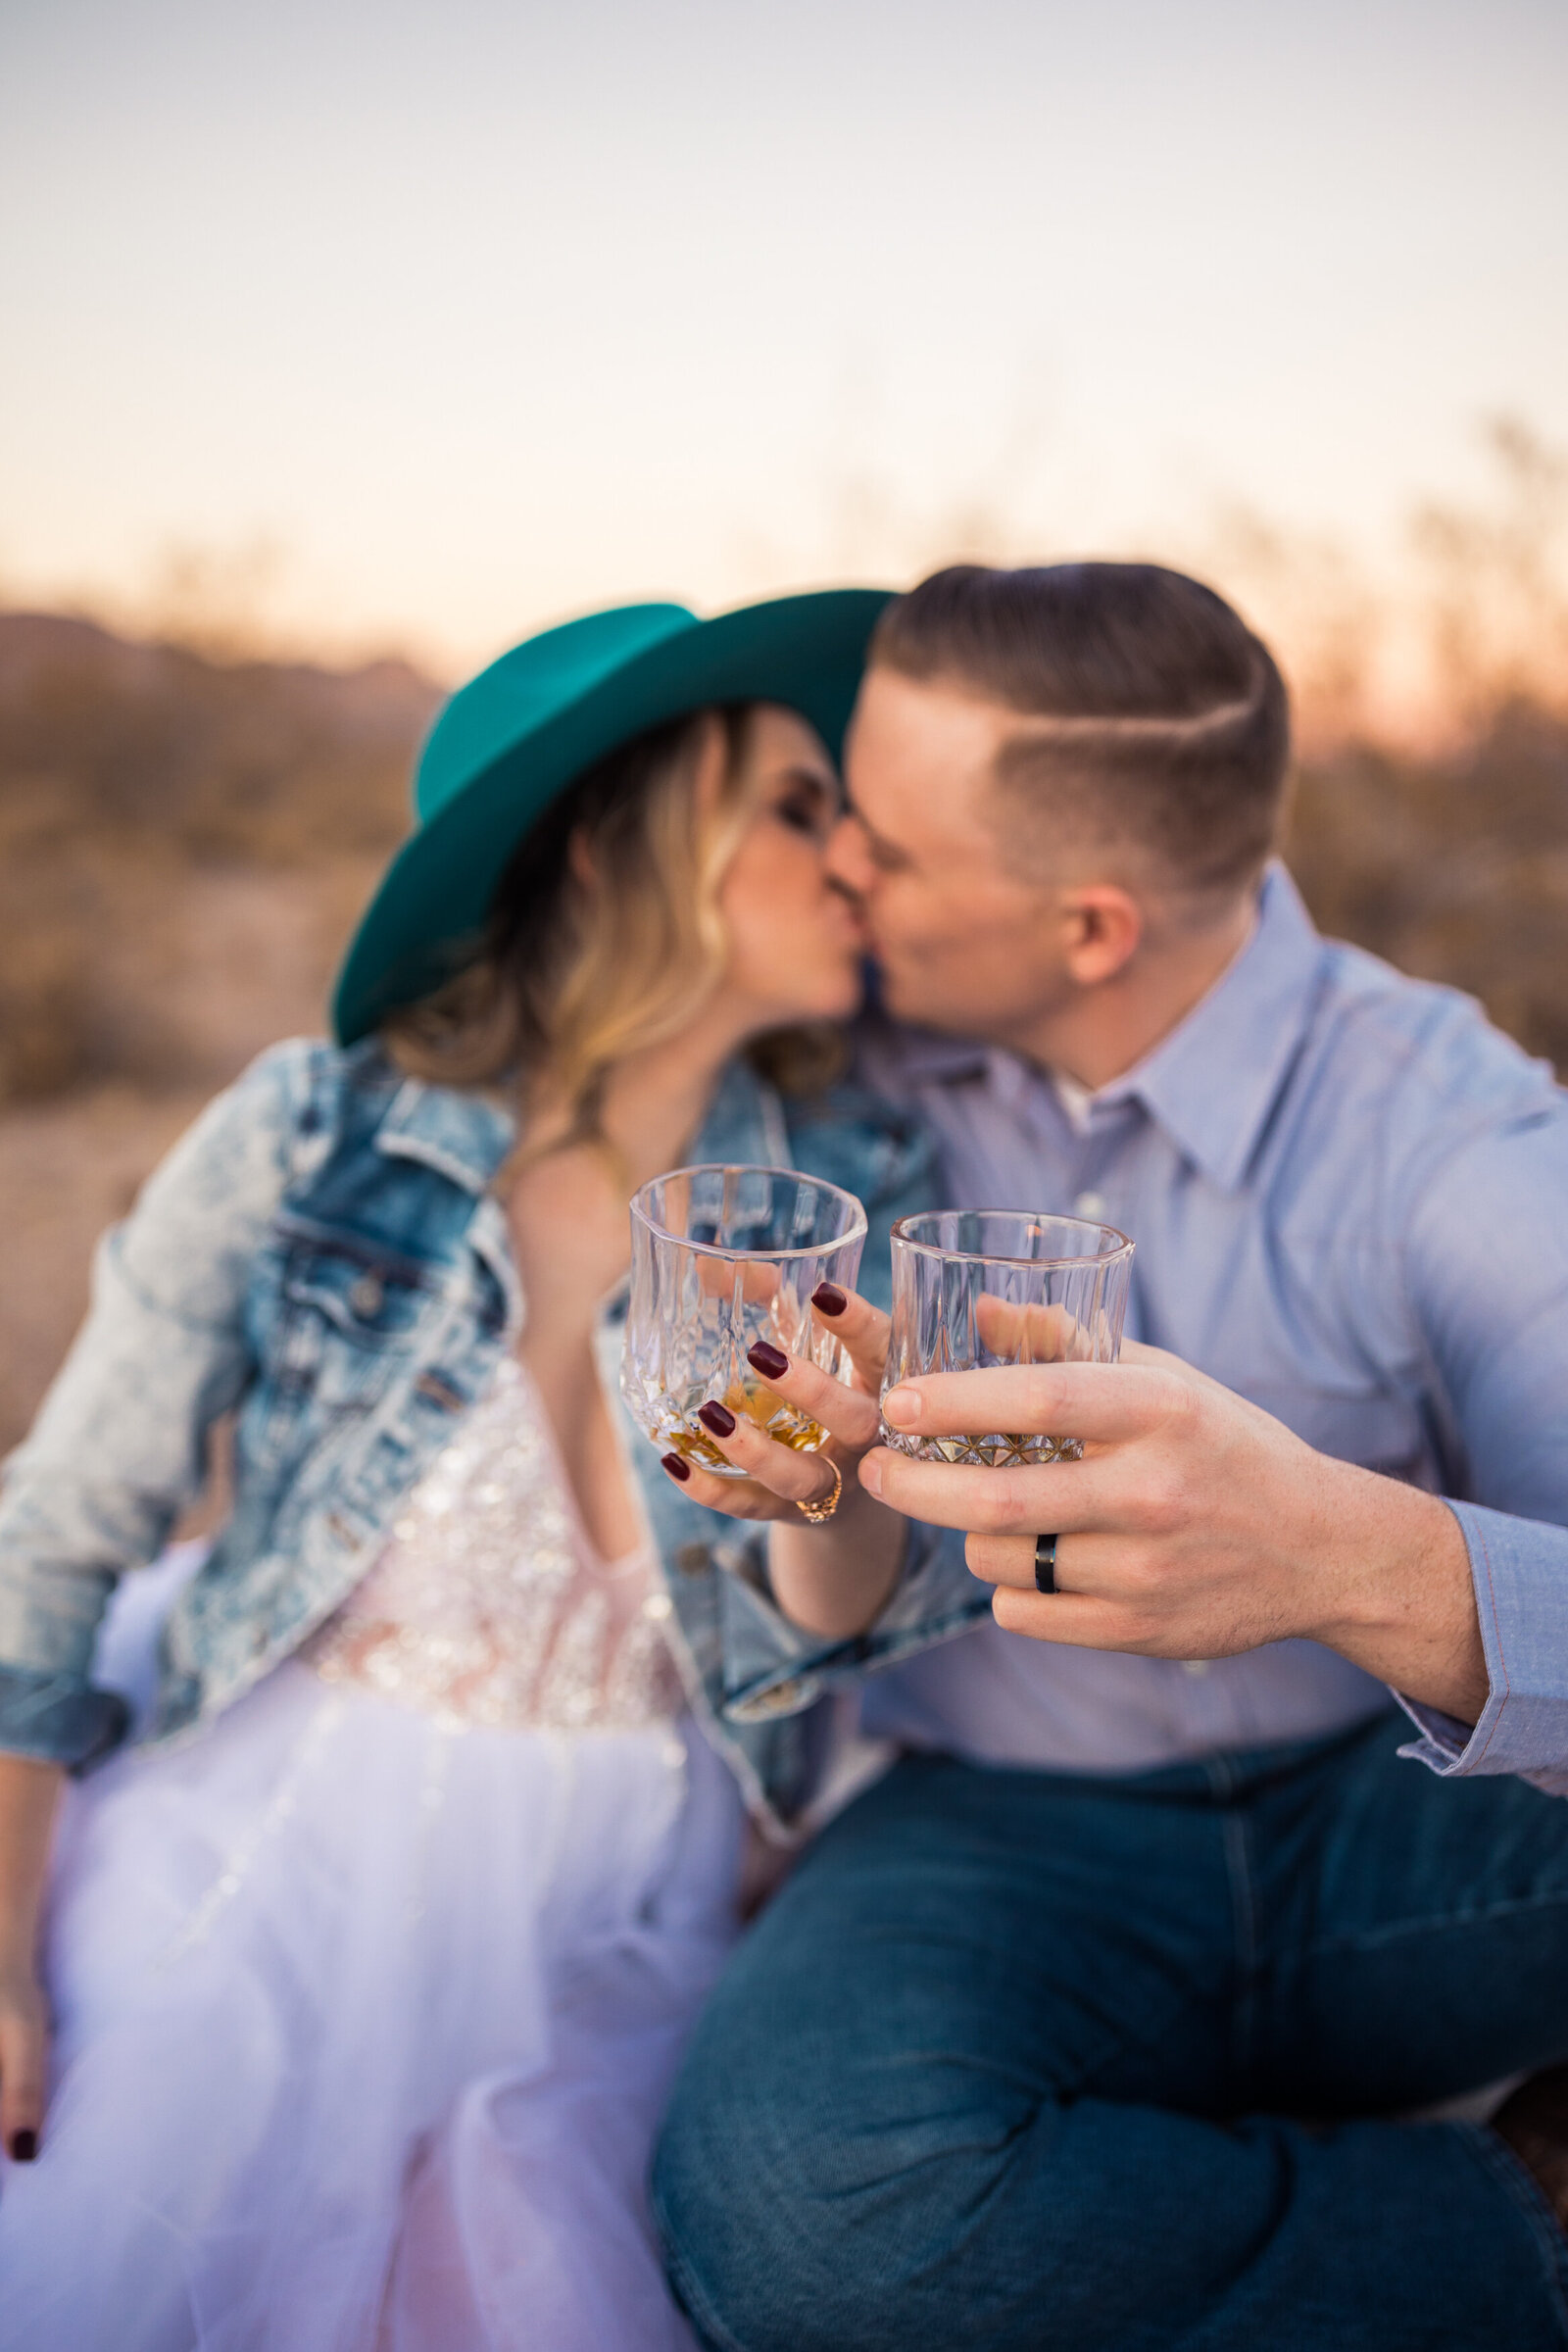 bourbon cheers during a unique elopement day